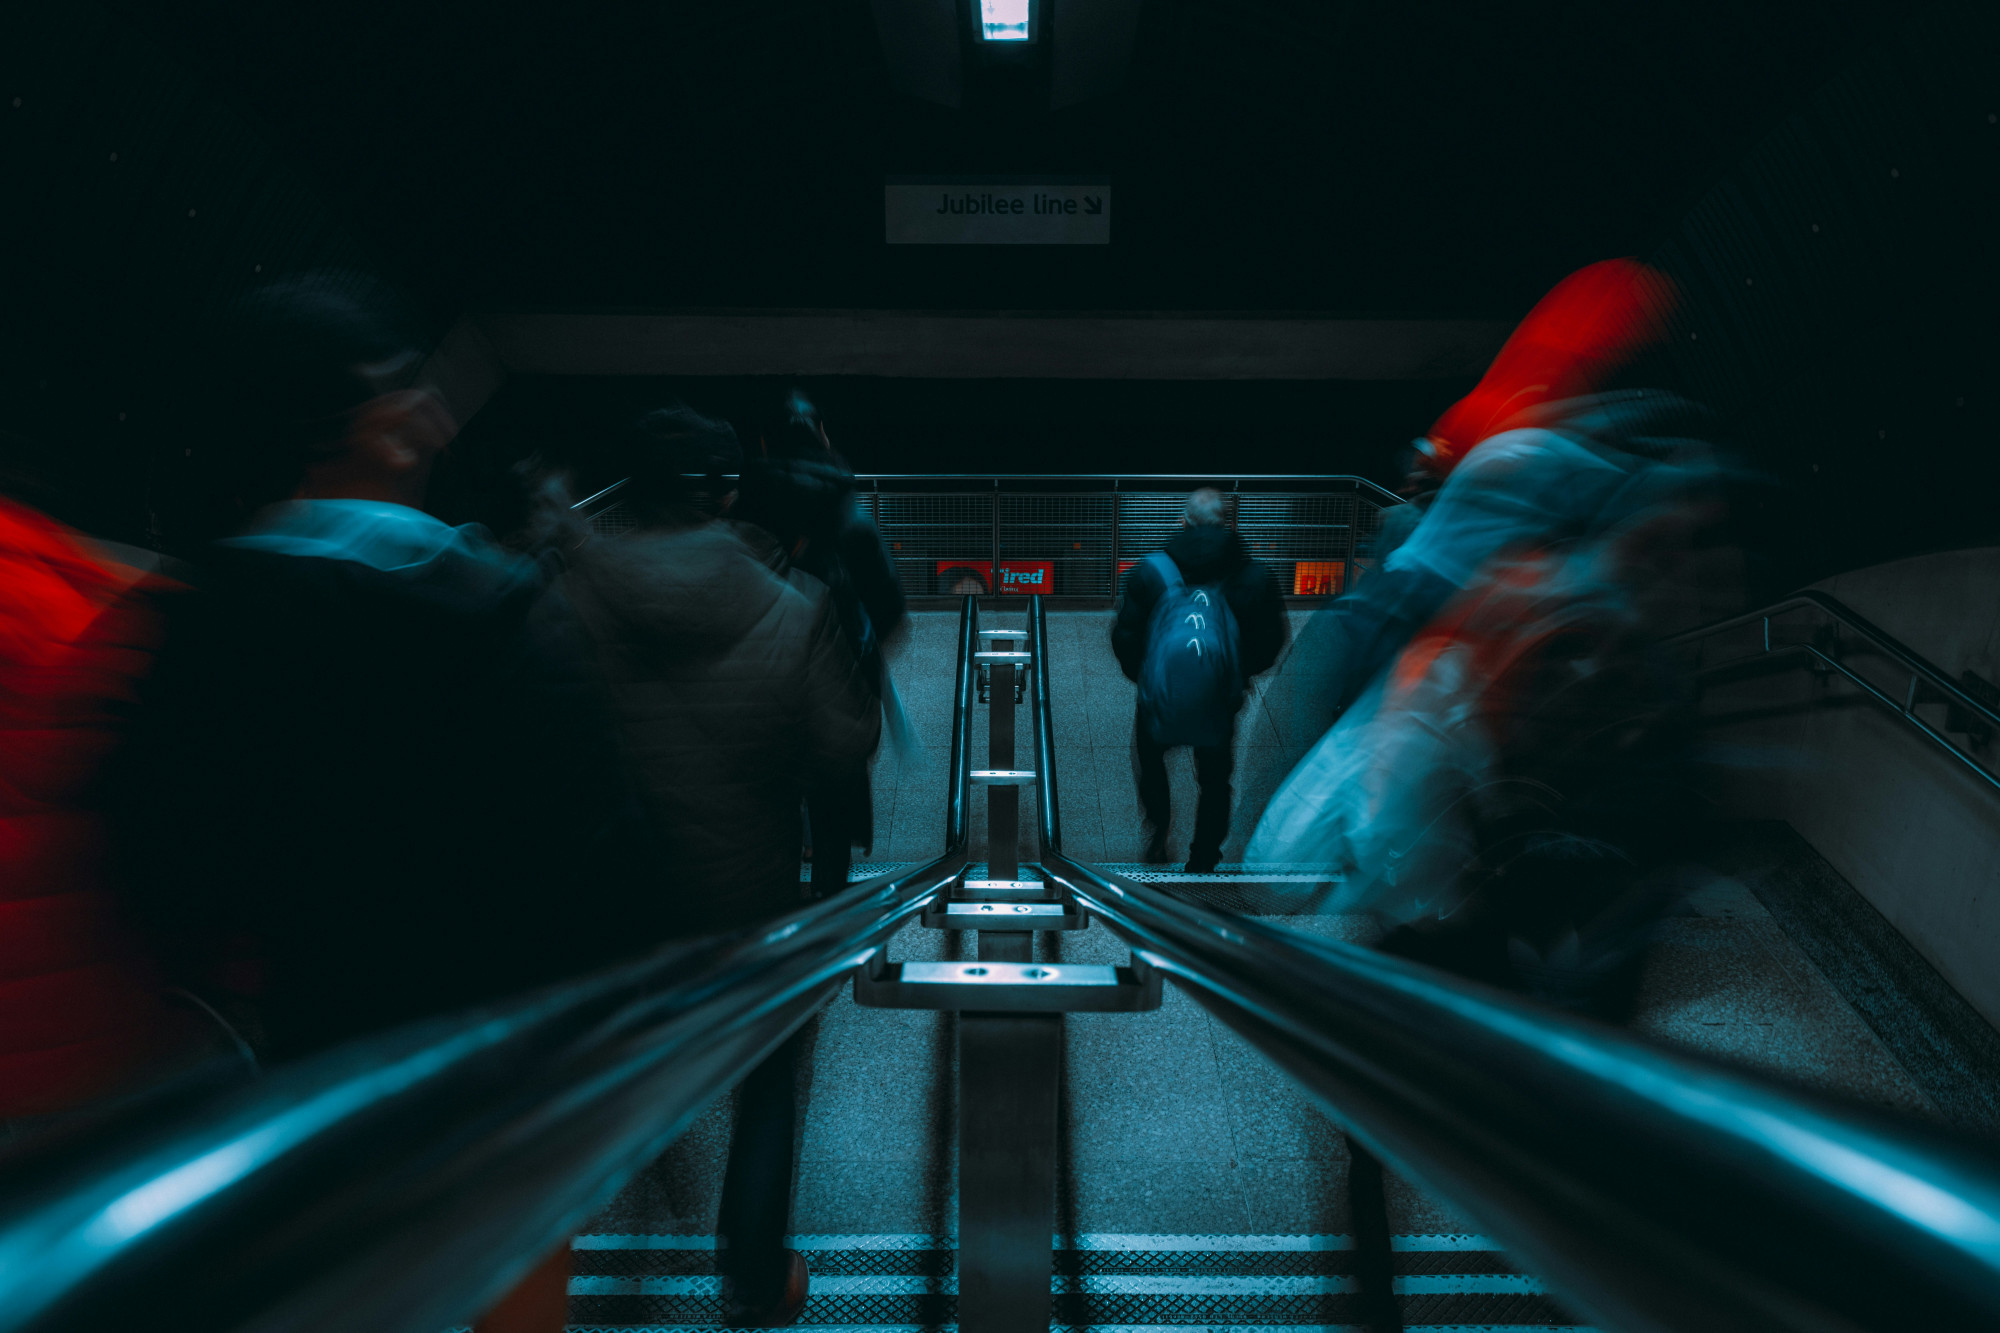 A group of rail passengers move down a dimly-lit stairwell